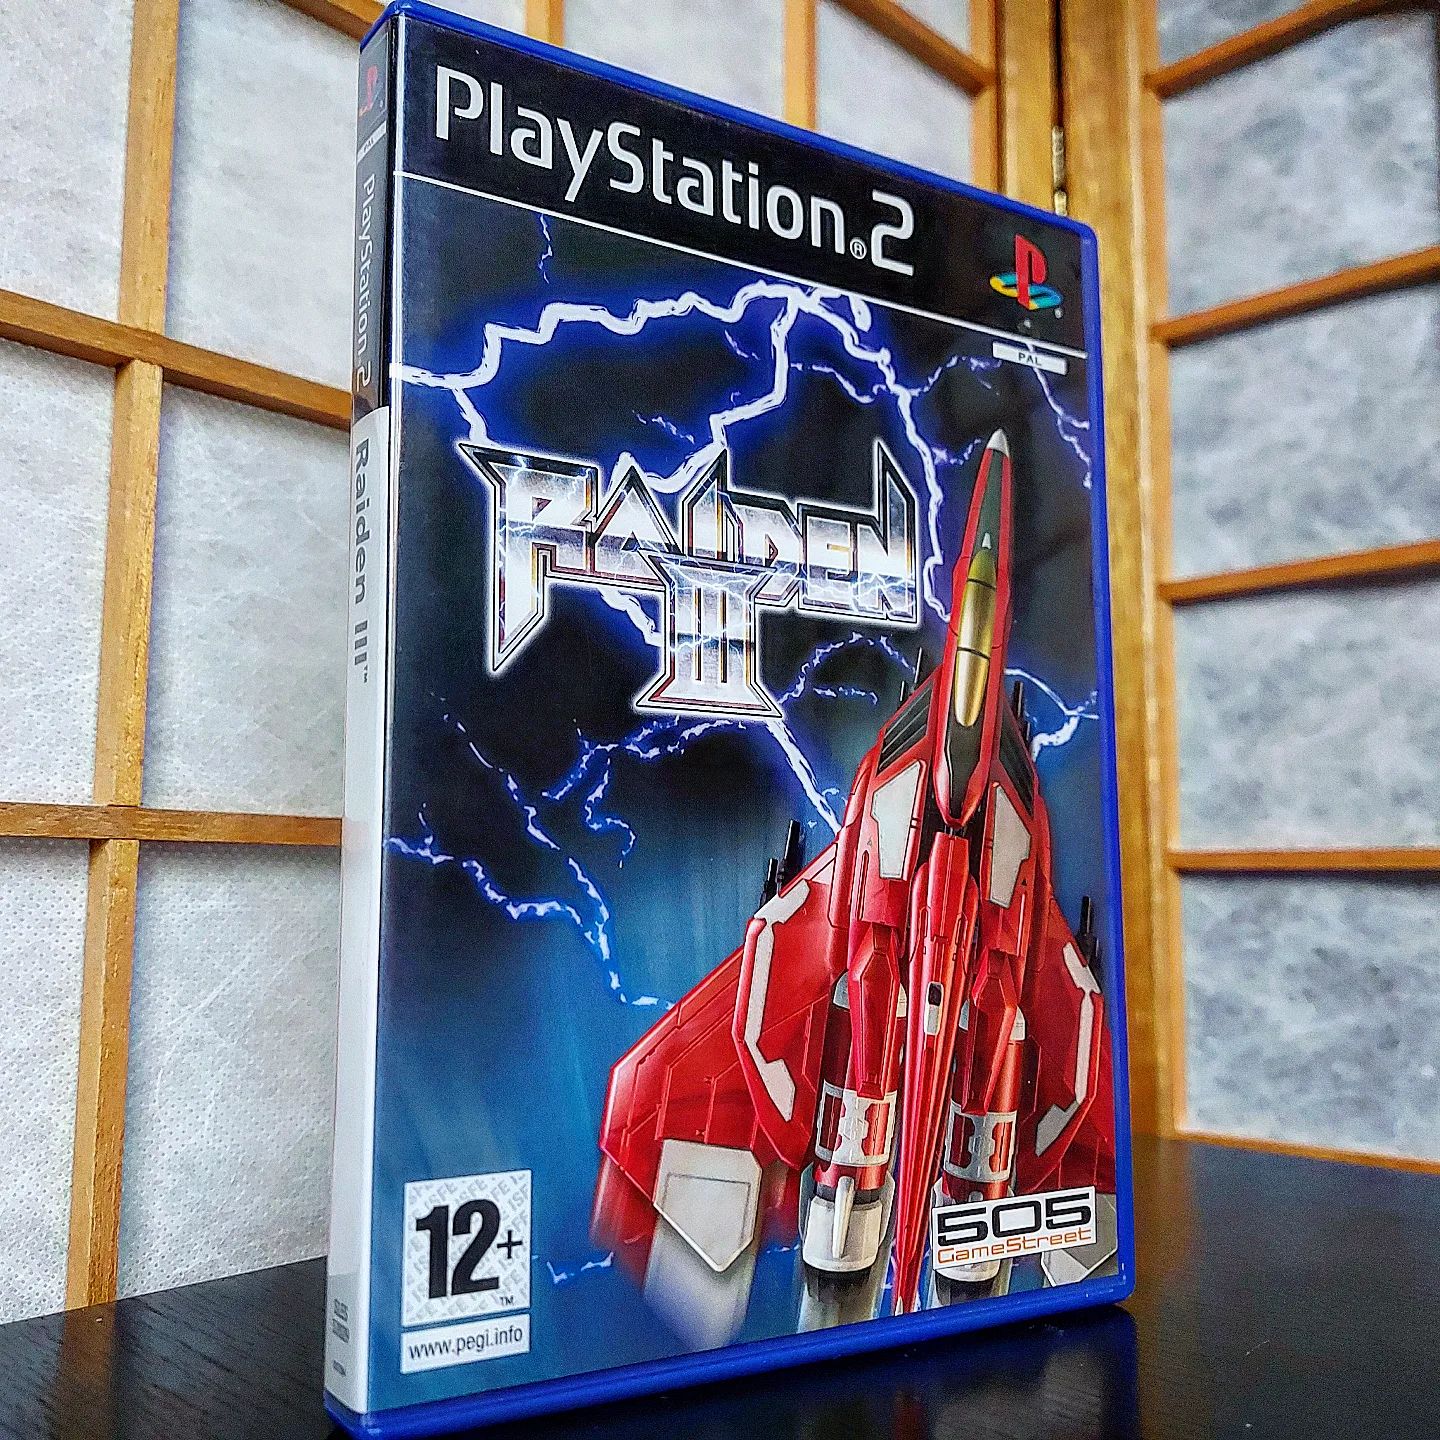 Let's ride the lightning on #shmupsunday with Raiden 3! Fantastic game. I bought this when it came out. 

Looking forward to play Raiden 4 and 5, when they get a duopack release on Switch! What a shmup console the Switch has become.

#retrogamepapa #gaming #gamecollector #gamecollecting #retrogames #retrogamecollector #ps2 #shootemups #shootmup #shmup #raiden #projectraiden #raiden3 #taito #moss #505gamestreet